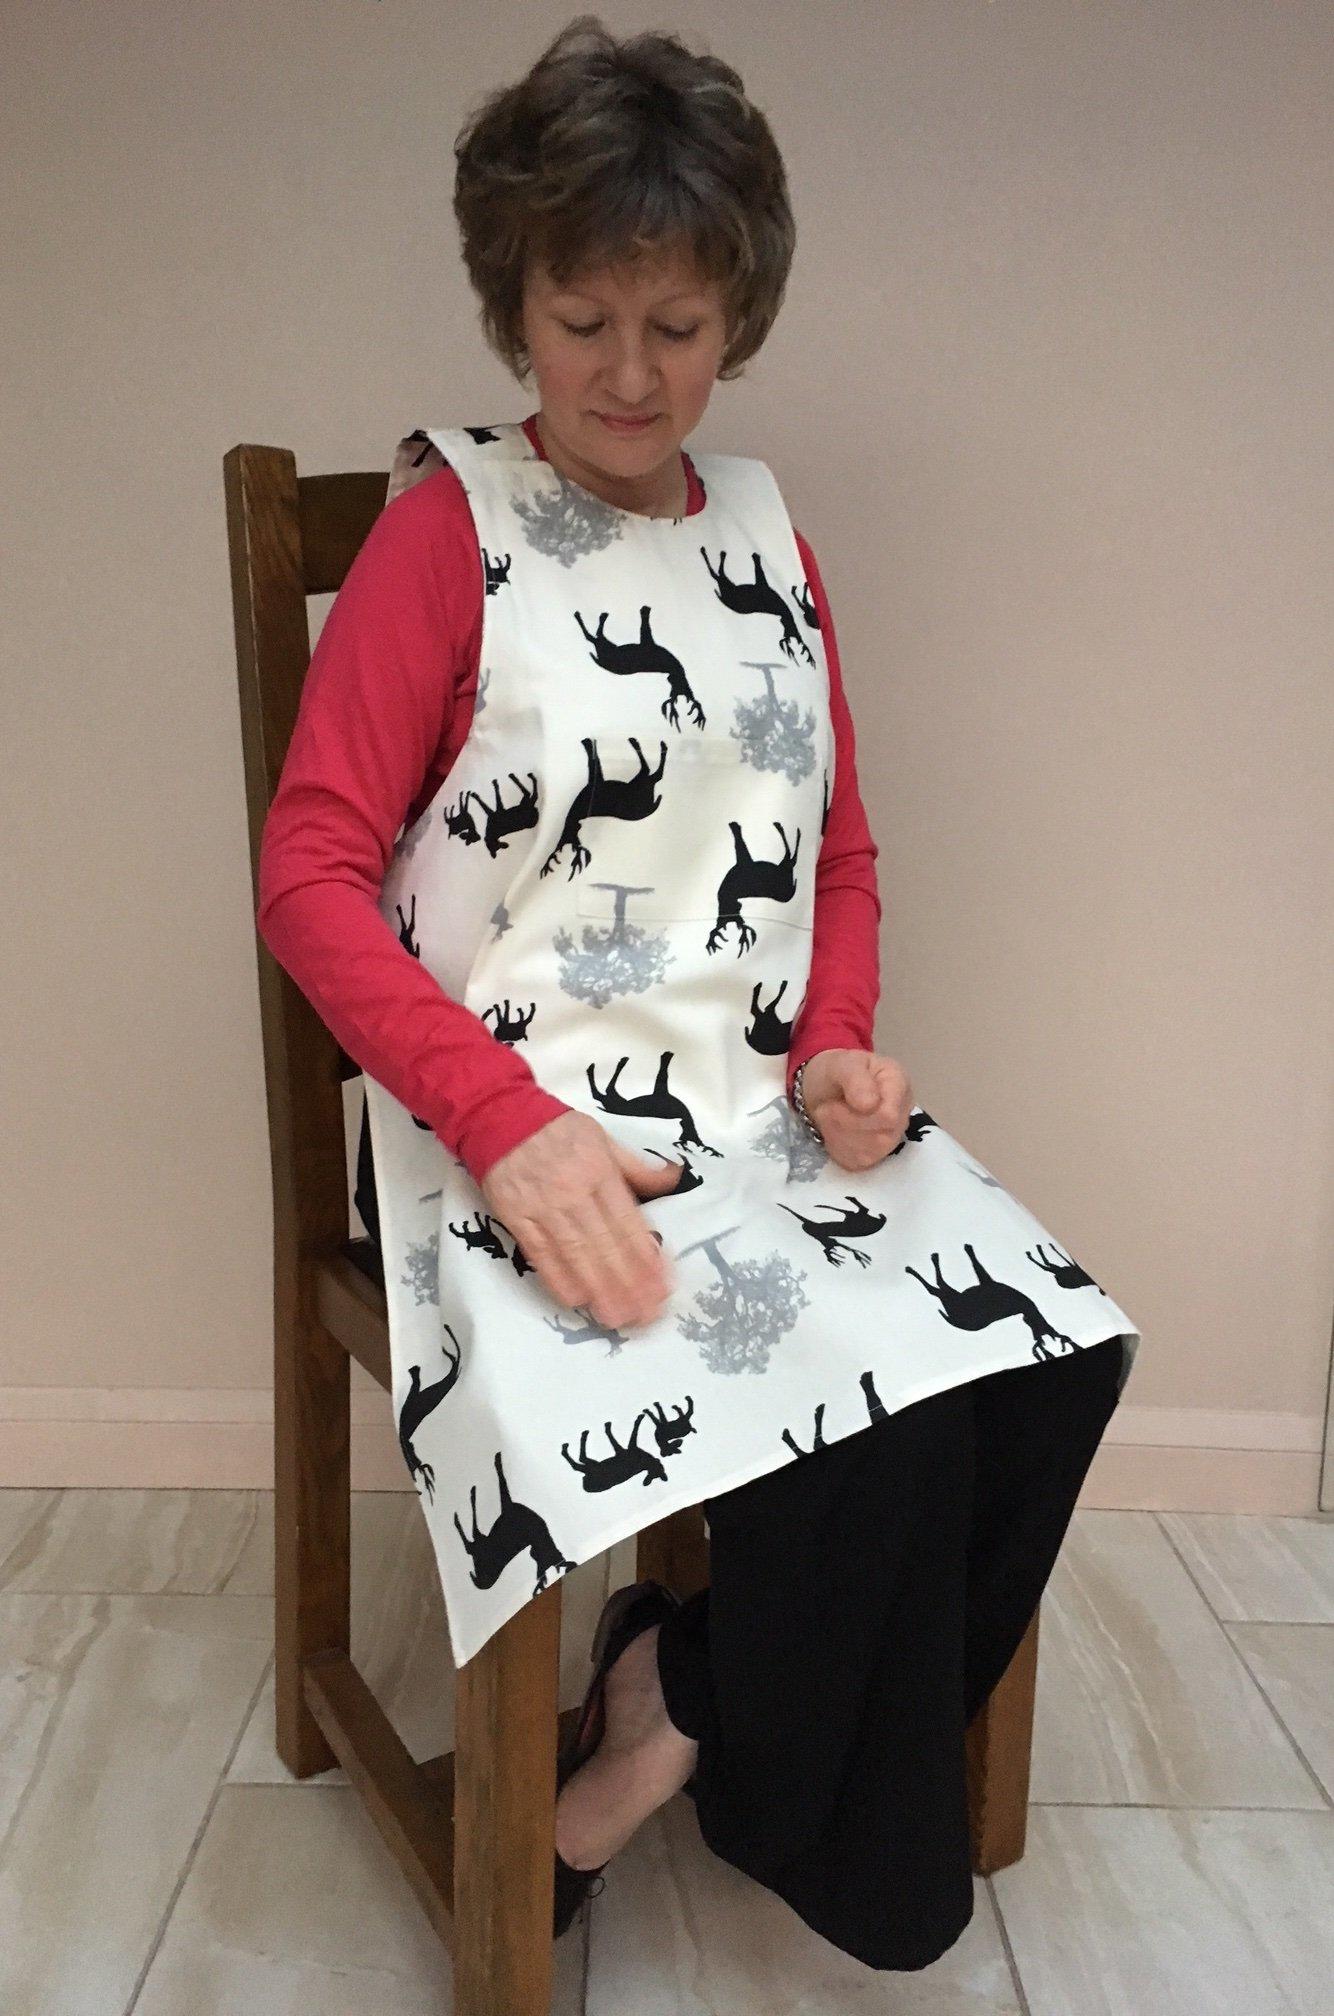 Smart Dining Drapron® to protect clothes in later stage dementia. So much better than an adult bib. Black and white deer pattern ideal gift